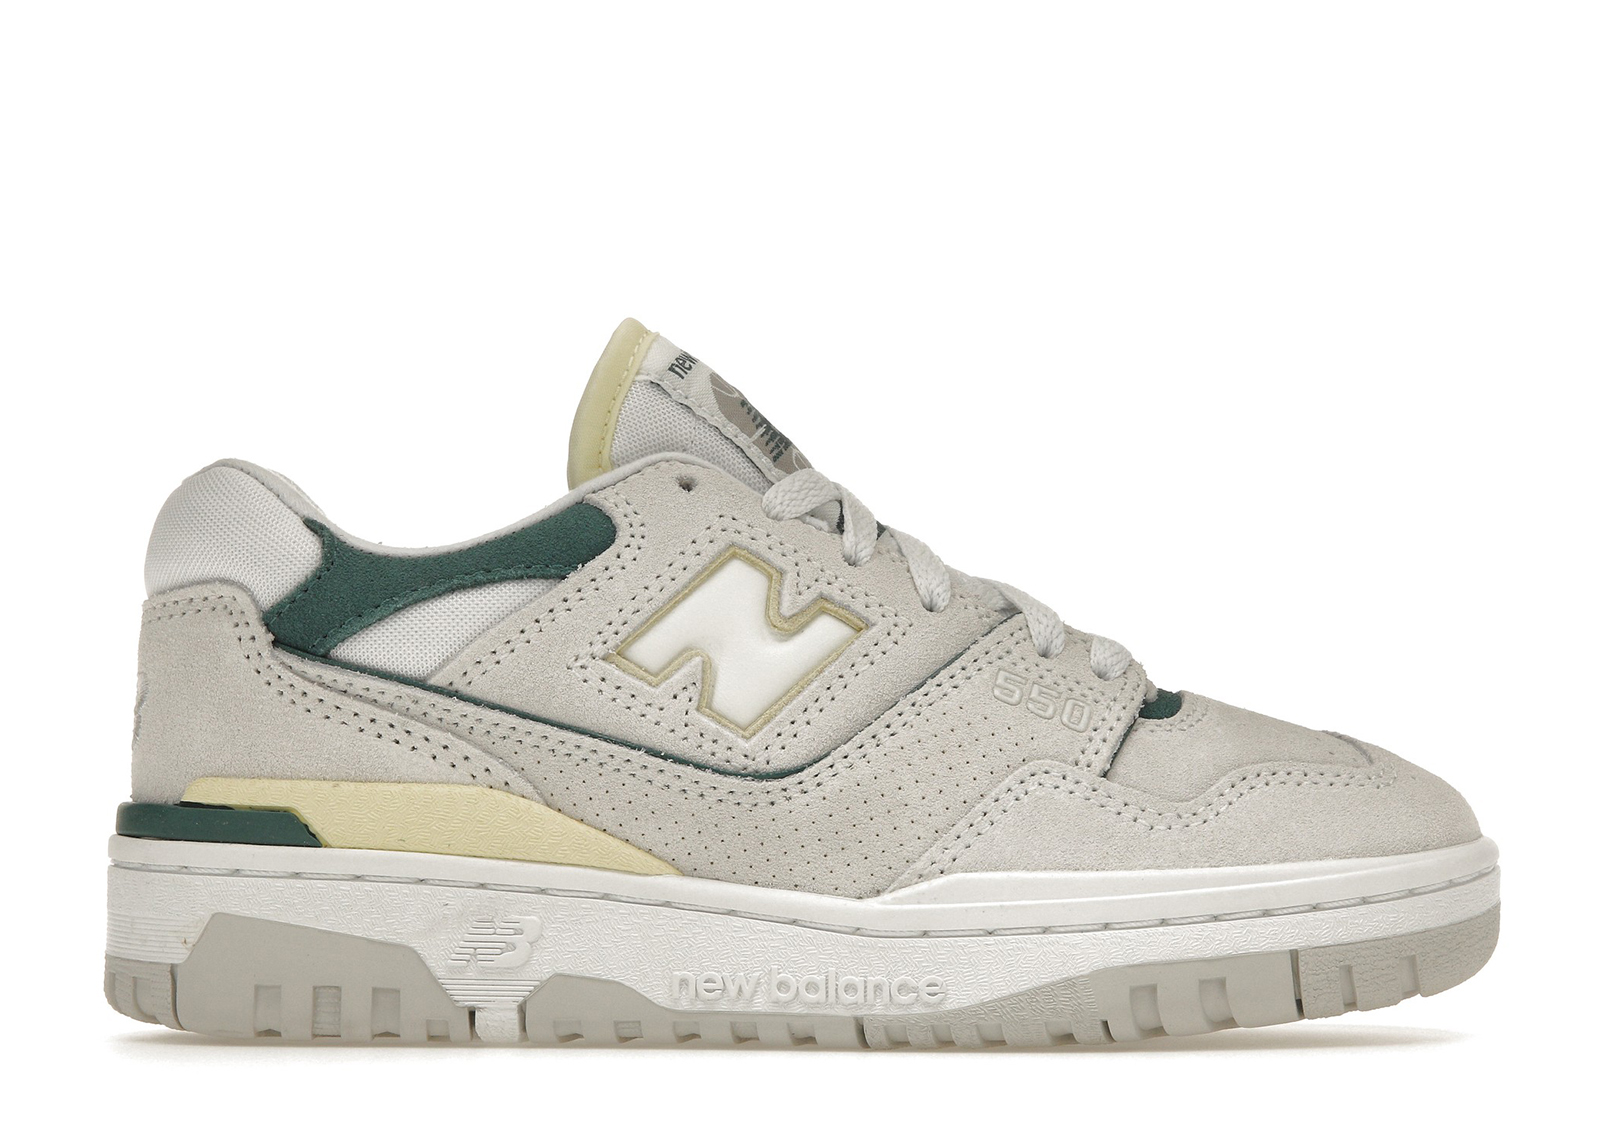 New Balance 550 Reflection Vintage Teal (Women's)